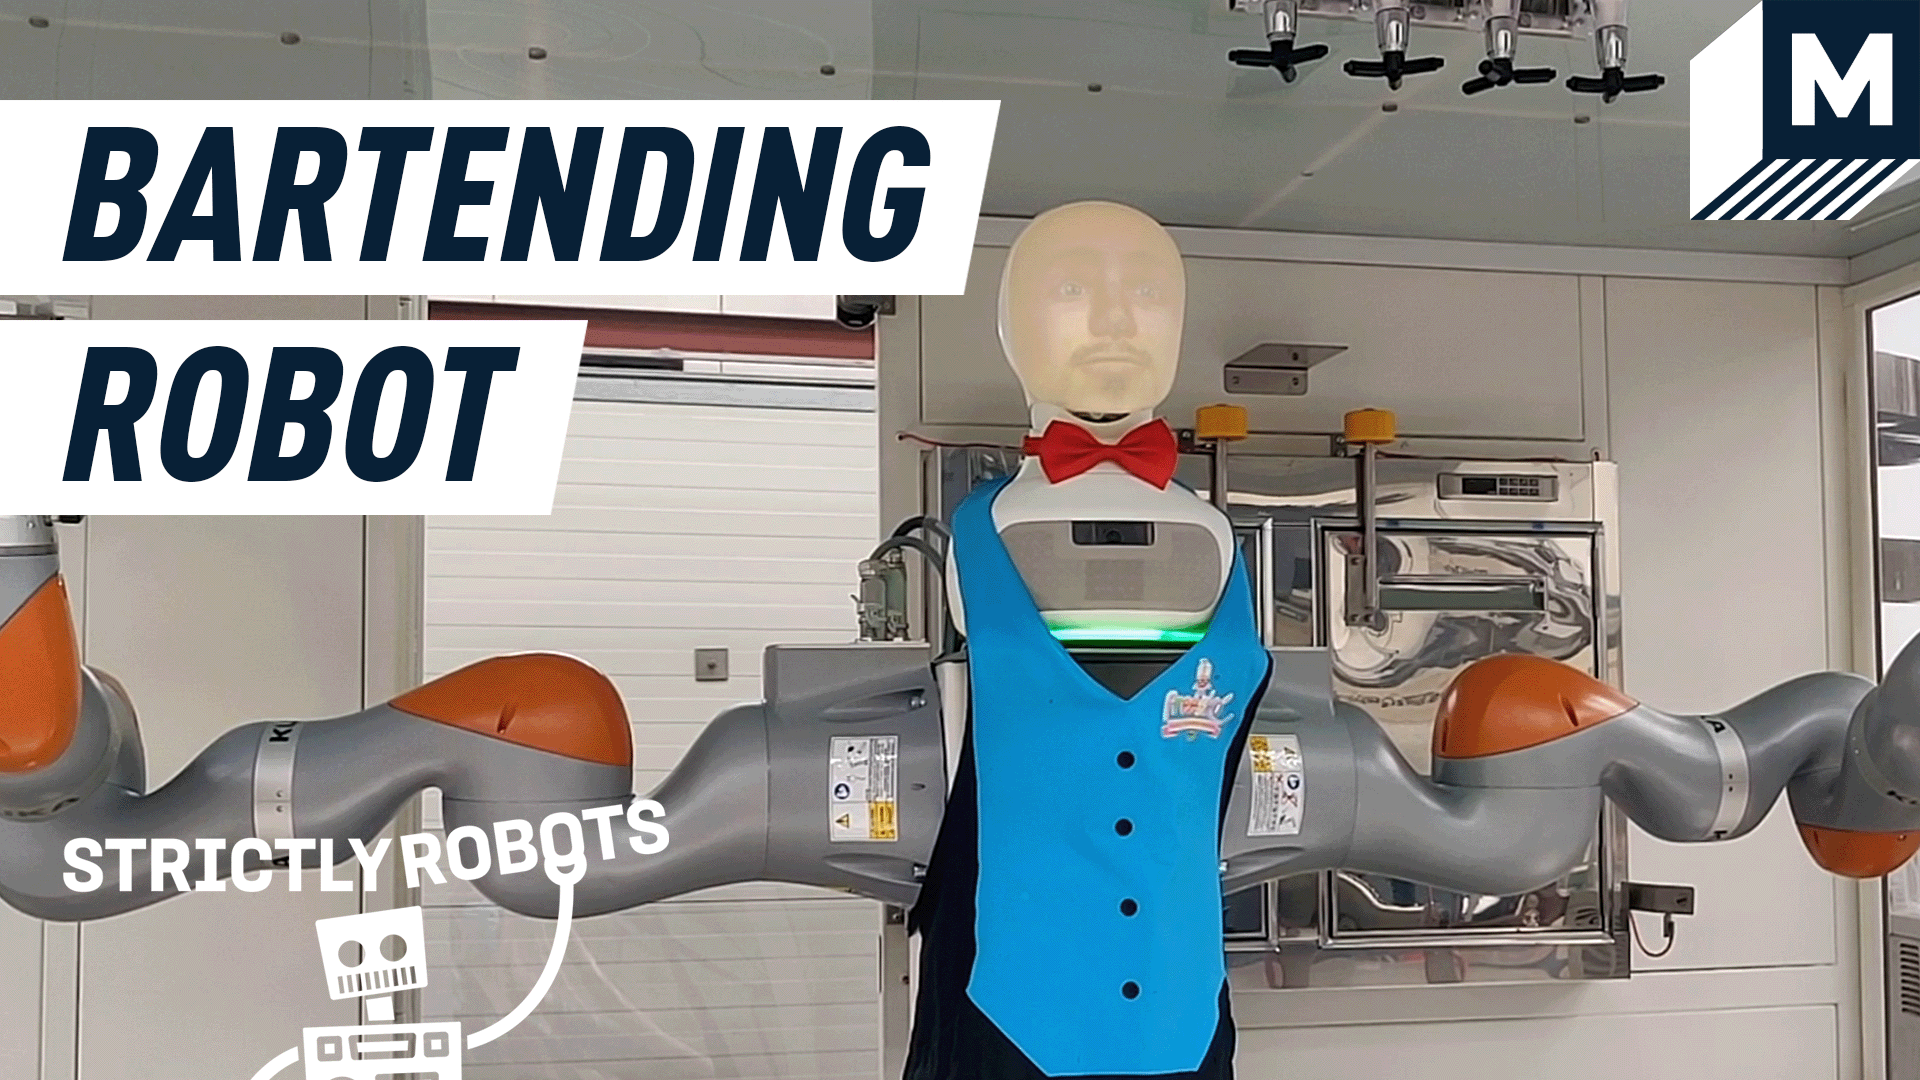 BRILLO the bartending robot equipped with an old school vest, a bowtie and a human-like face.